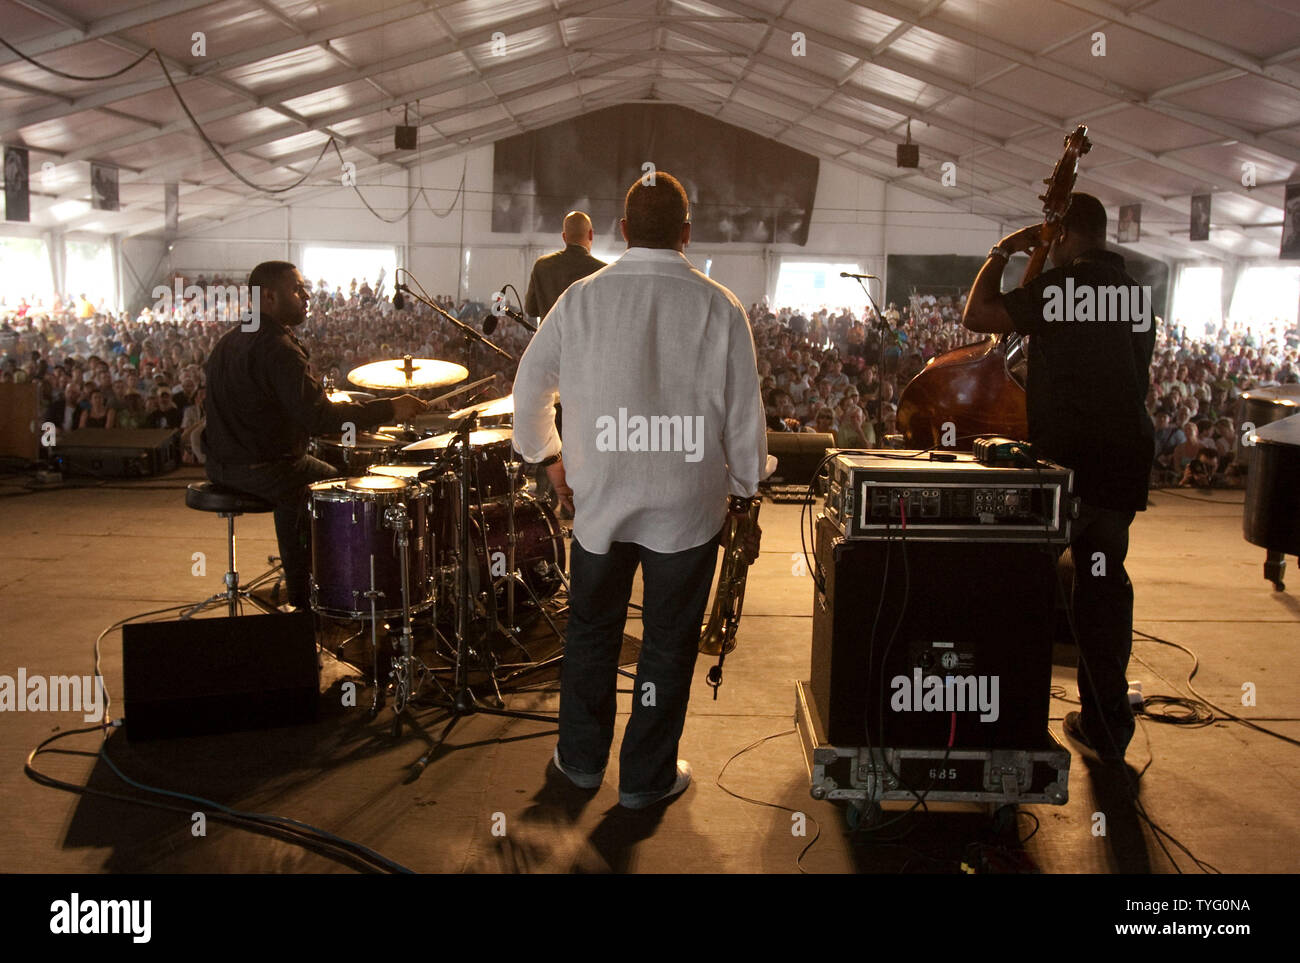 Grammy winner Terence Blanchard listens to his group play during his set in the WWOZ Jazz Tent at the New Orleans Jazz & Heritage Festival on April 26, 2009.  The 10-day festival sponsored by Shell attracts 400,000 people yearly.  (UPI Photo/Bevil Knapp) Stock Photo